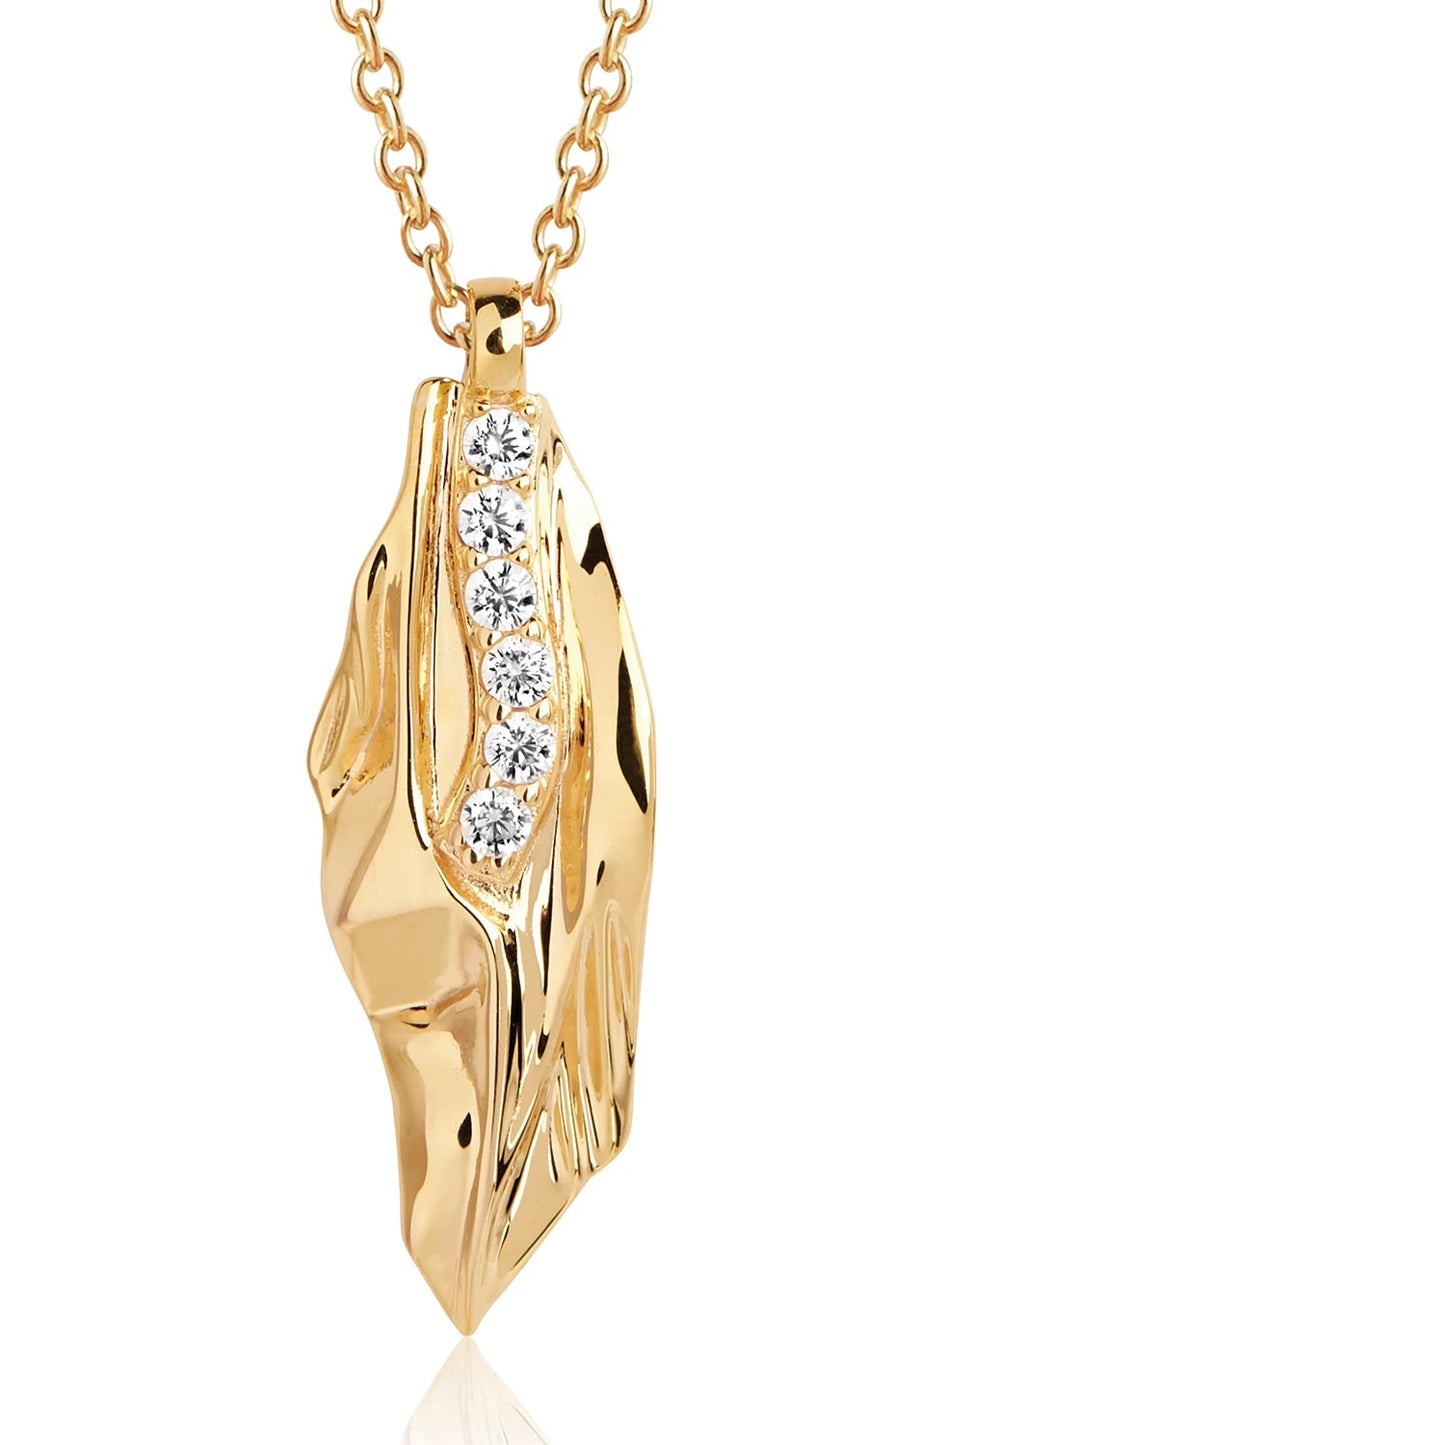 Sif Jakobs Vulcanello Pendant - 18ct Gold Plated Sterling Silver with White Zirconia